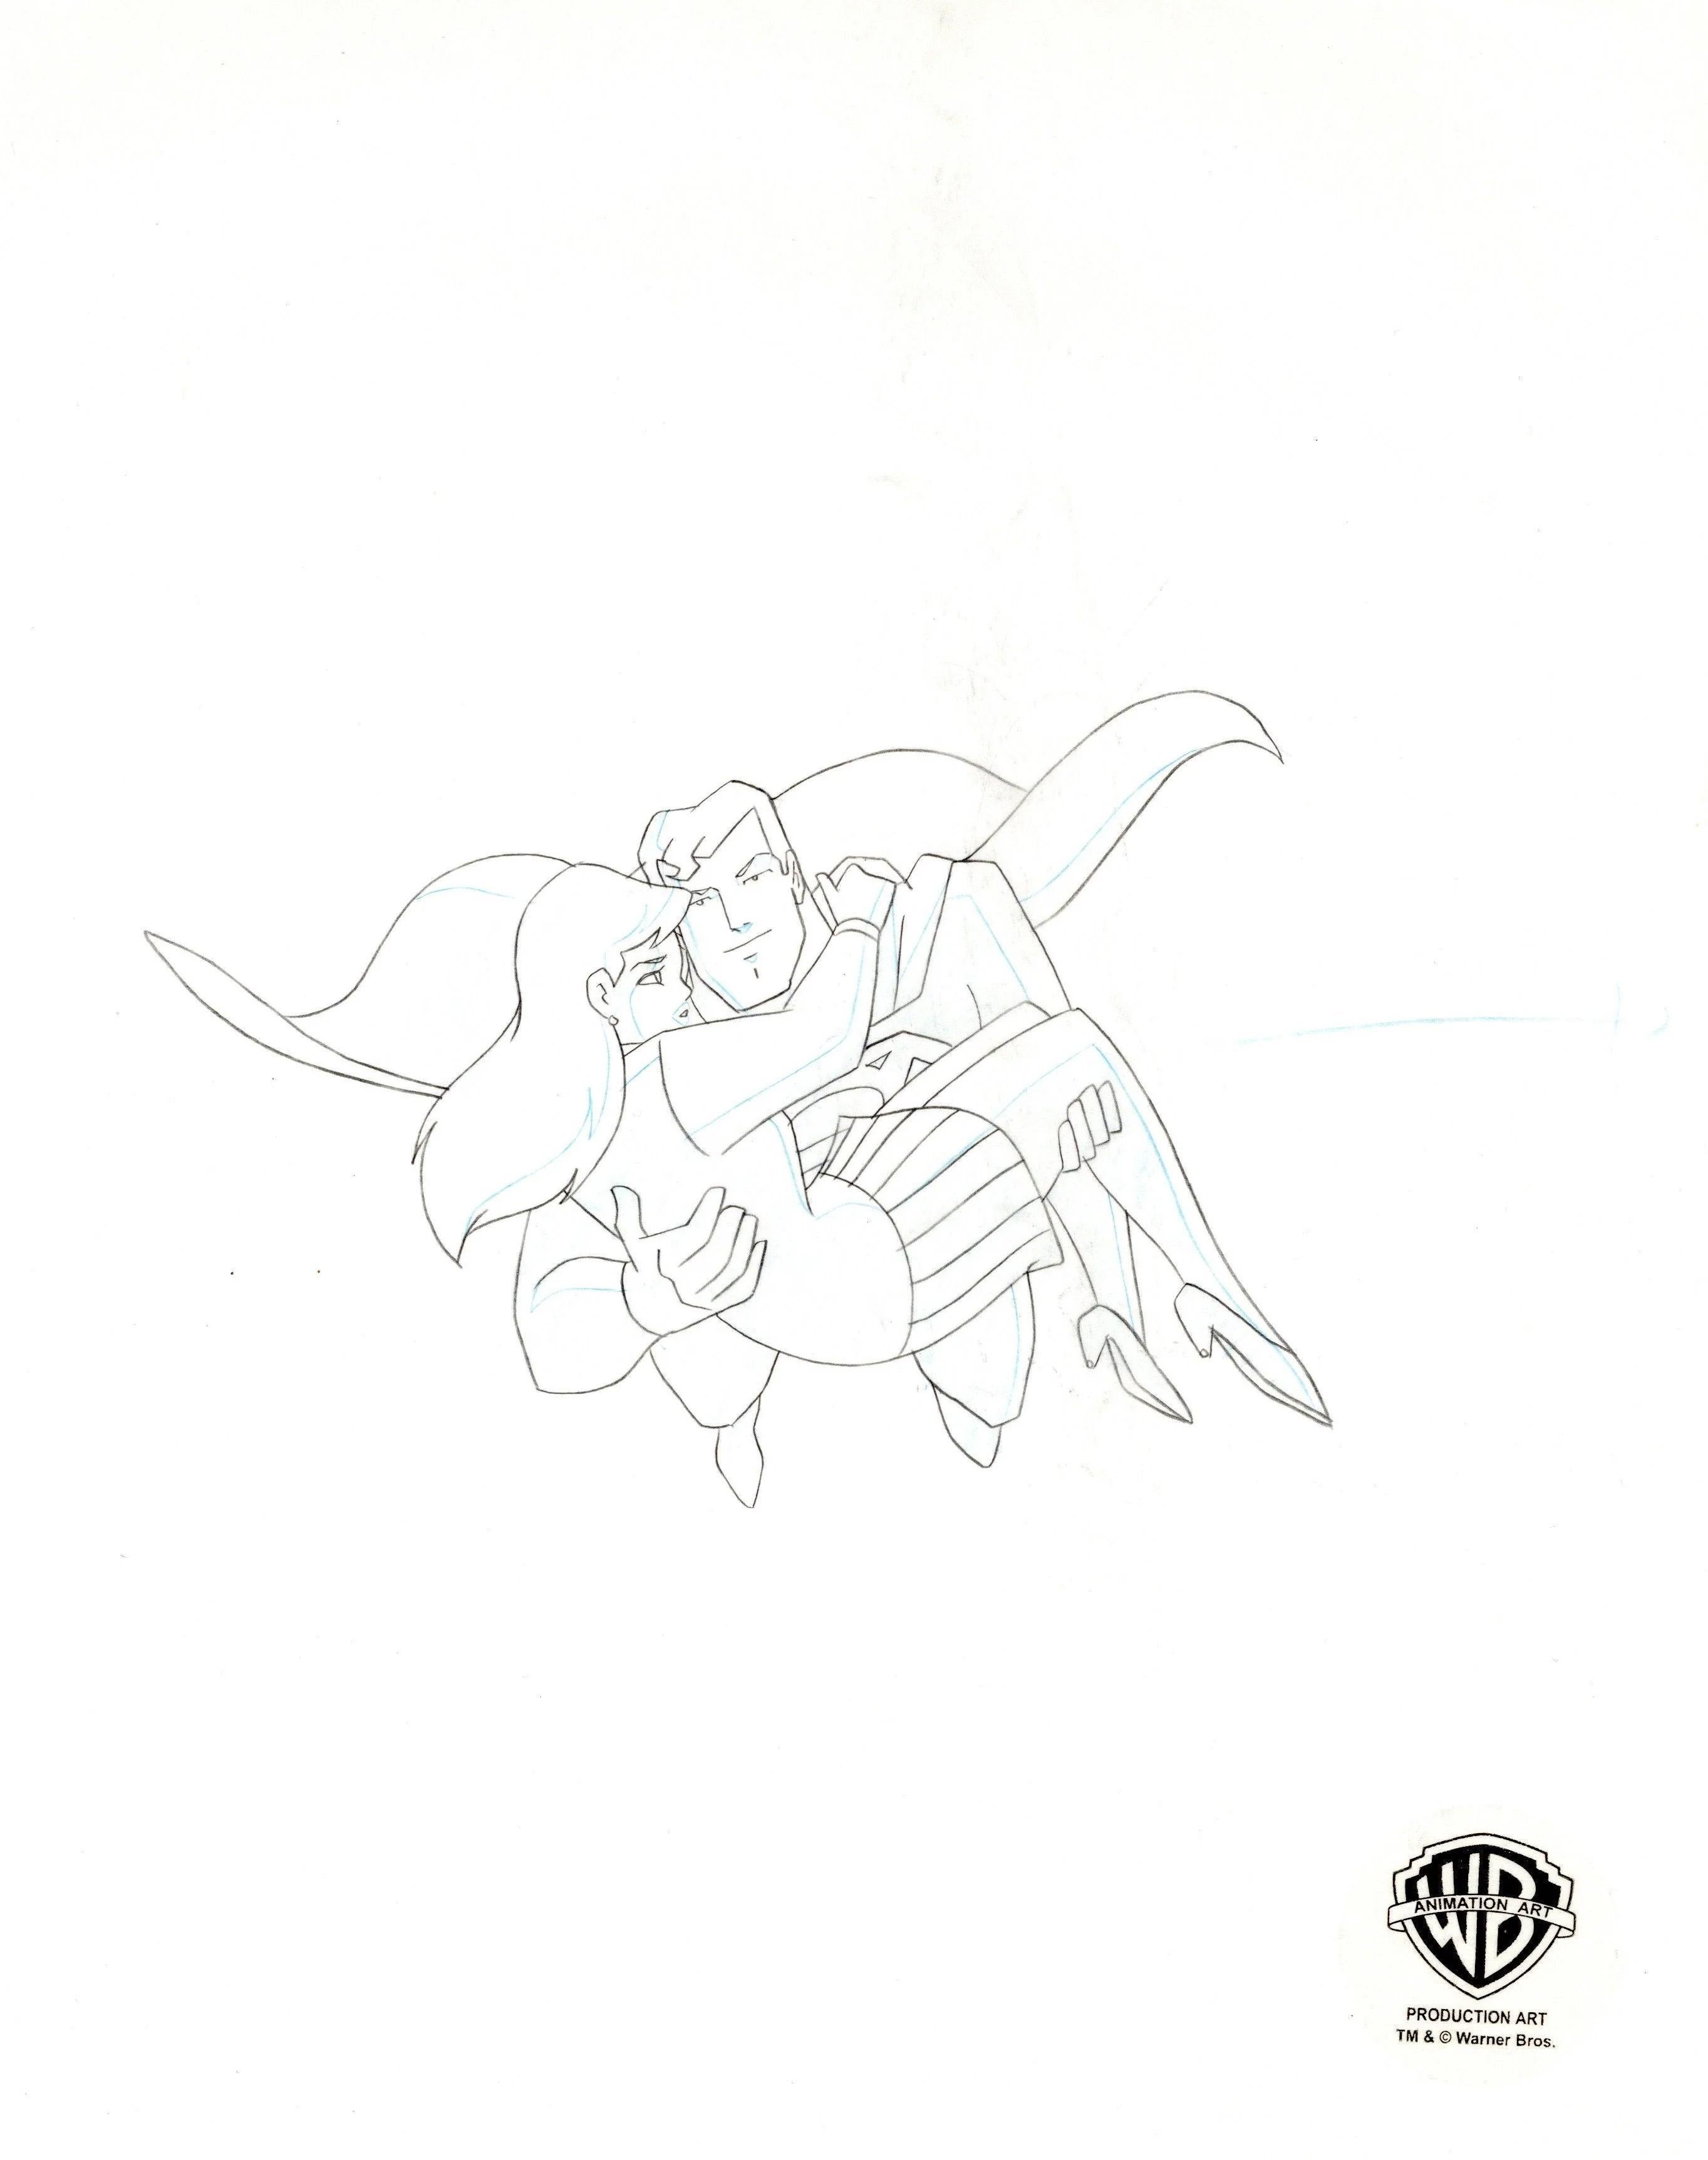 Superman the Animated Series Original Production Drawing: Superman and Lois Lane - Art by DC Comics Studio Artists